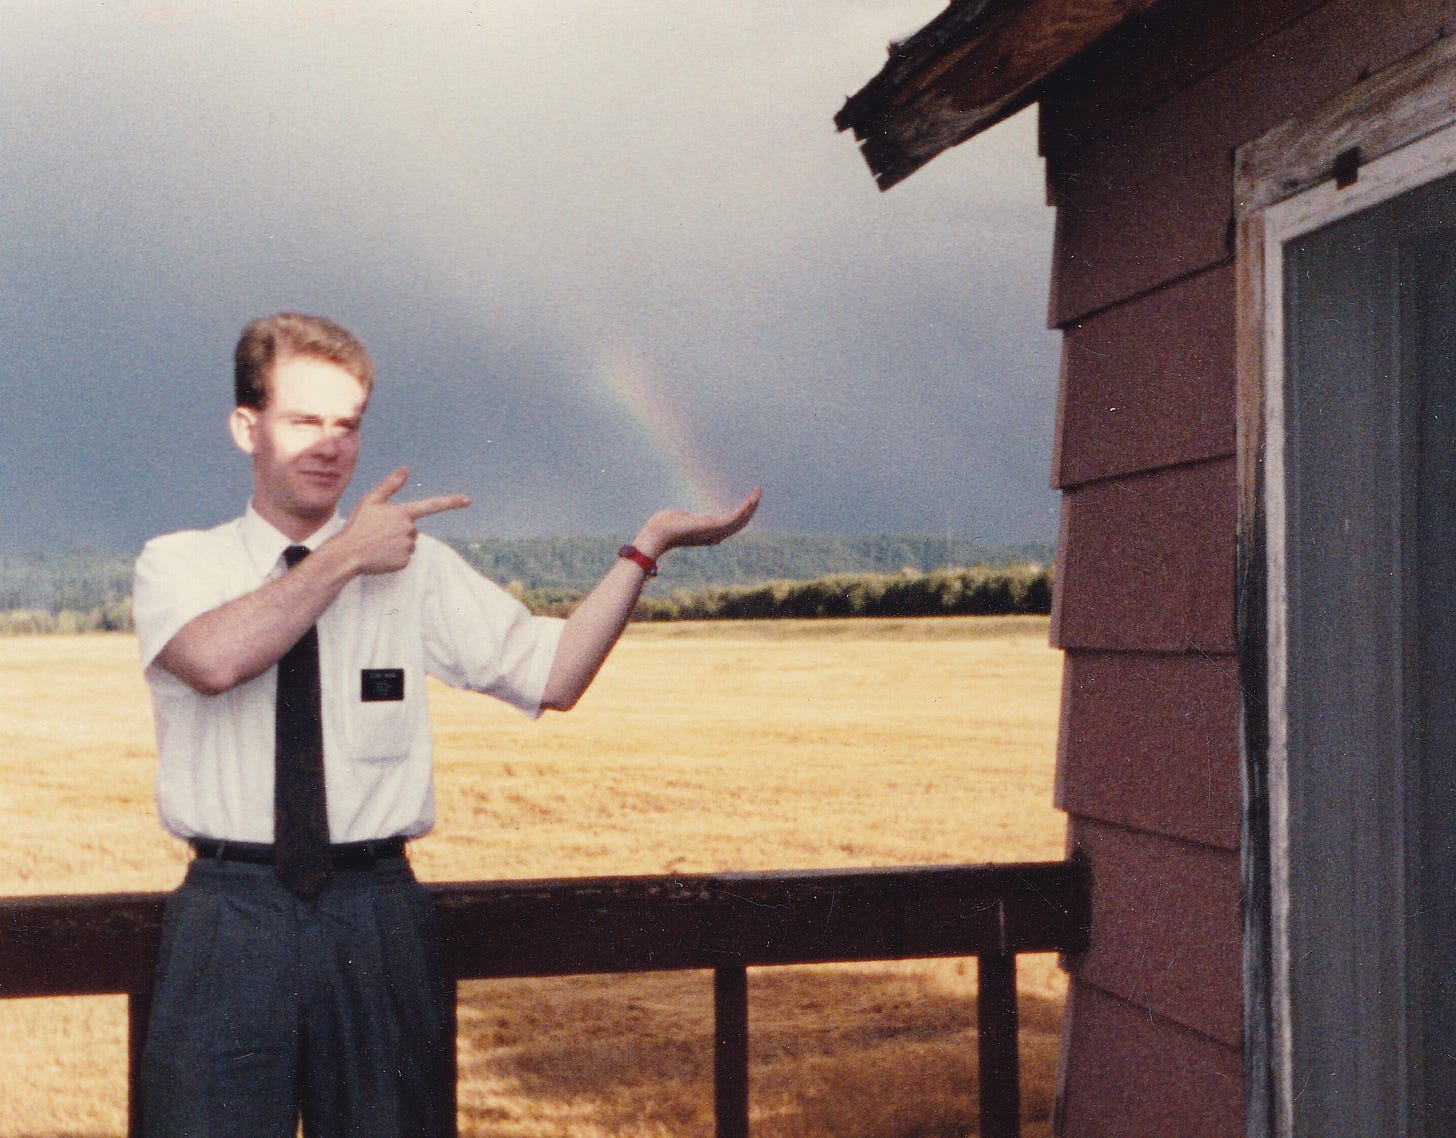 A Mormon missionary poses on the deck of a tar-shingled house with a wide wheatfield behind him. It looks like he's catching a distant rainbow in his open hand.